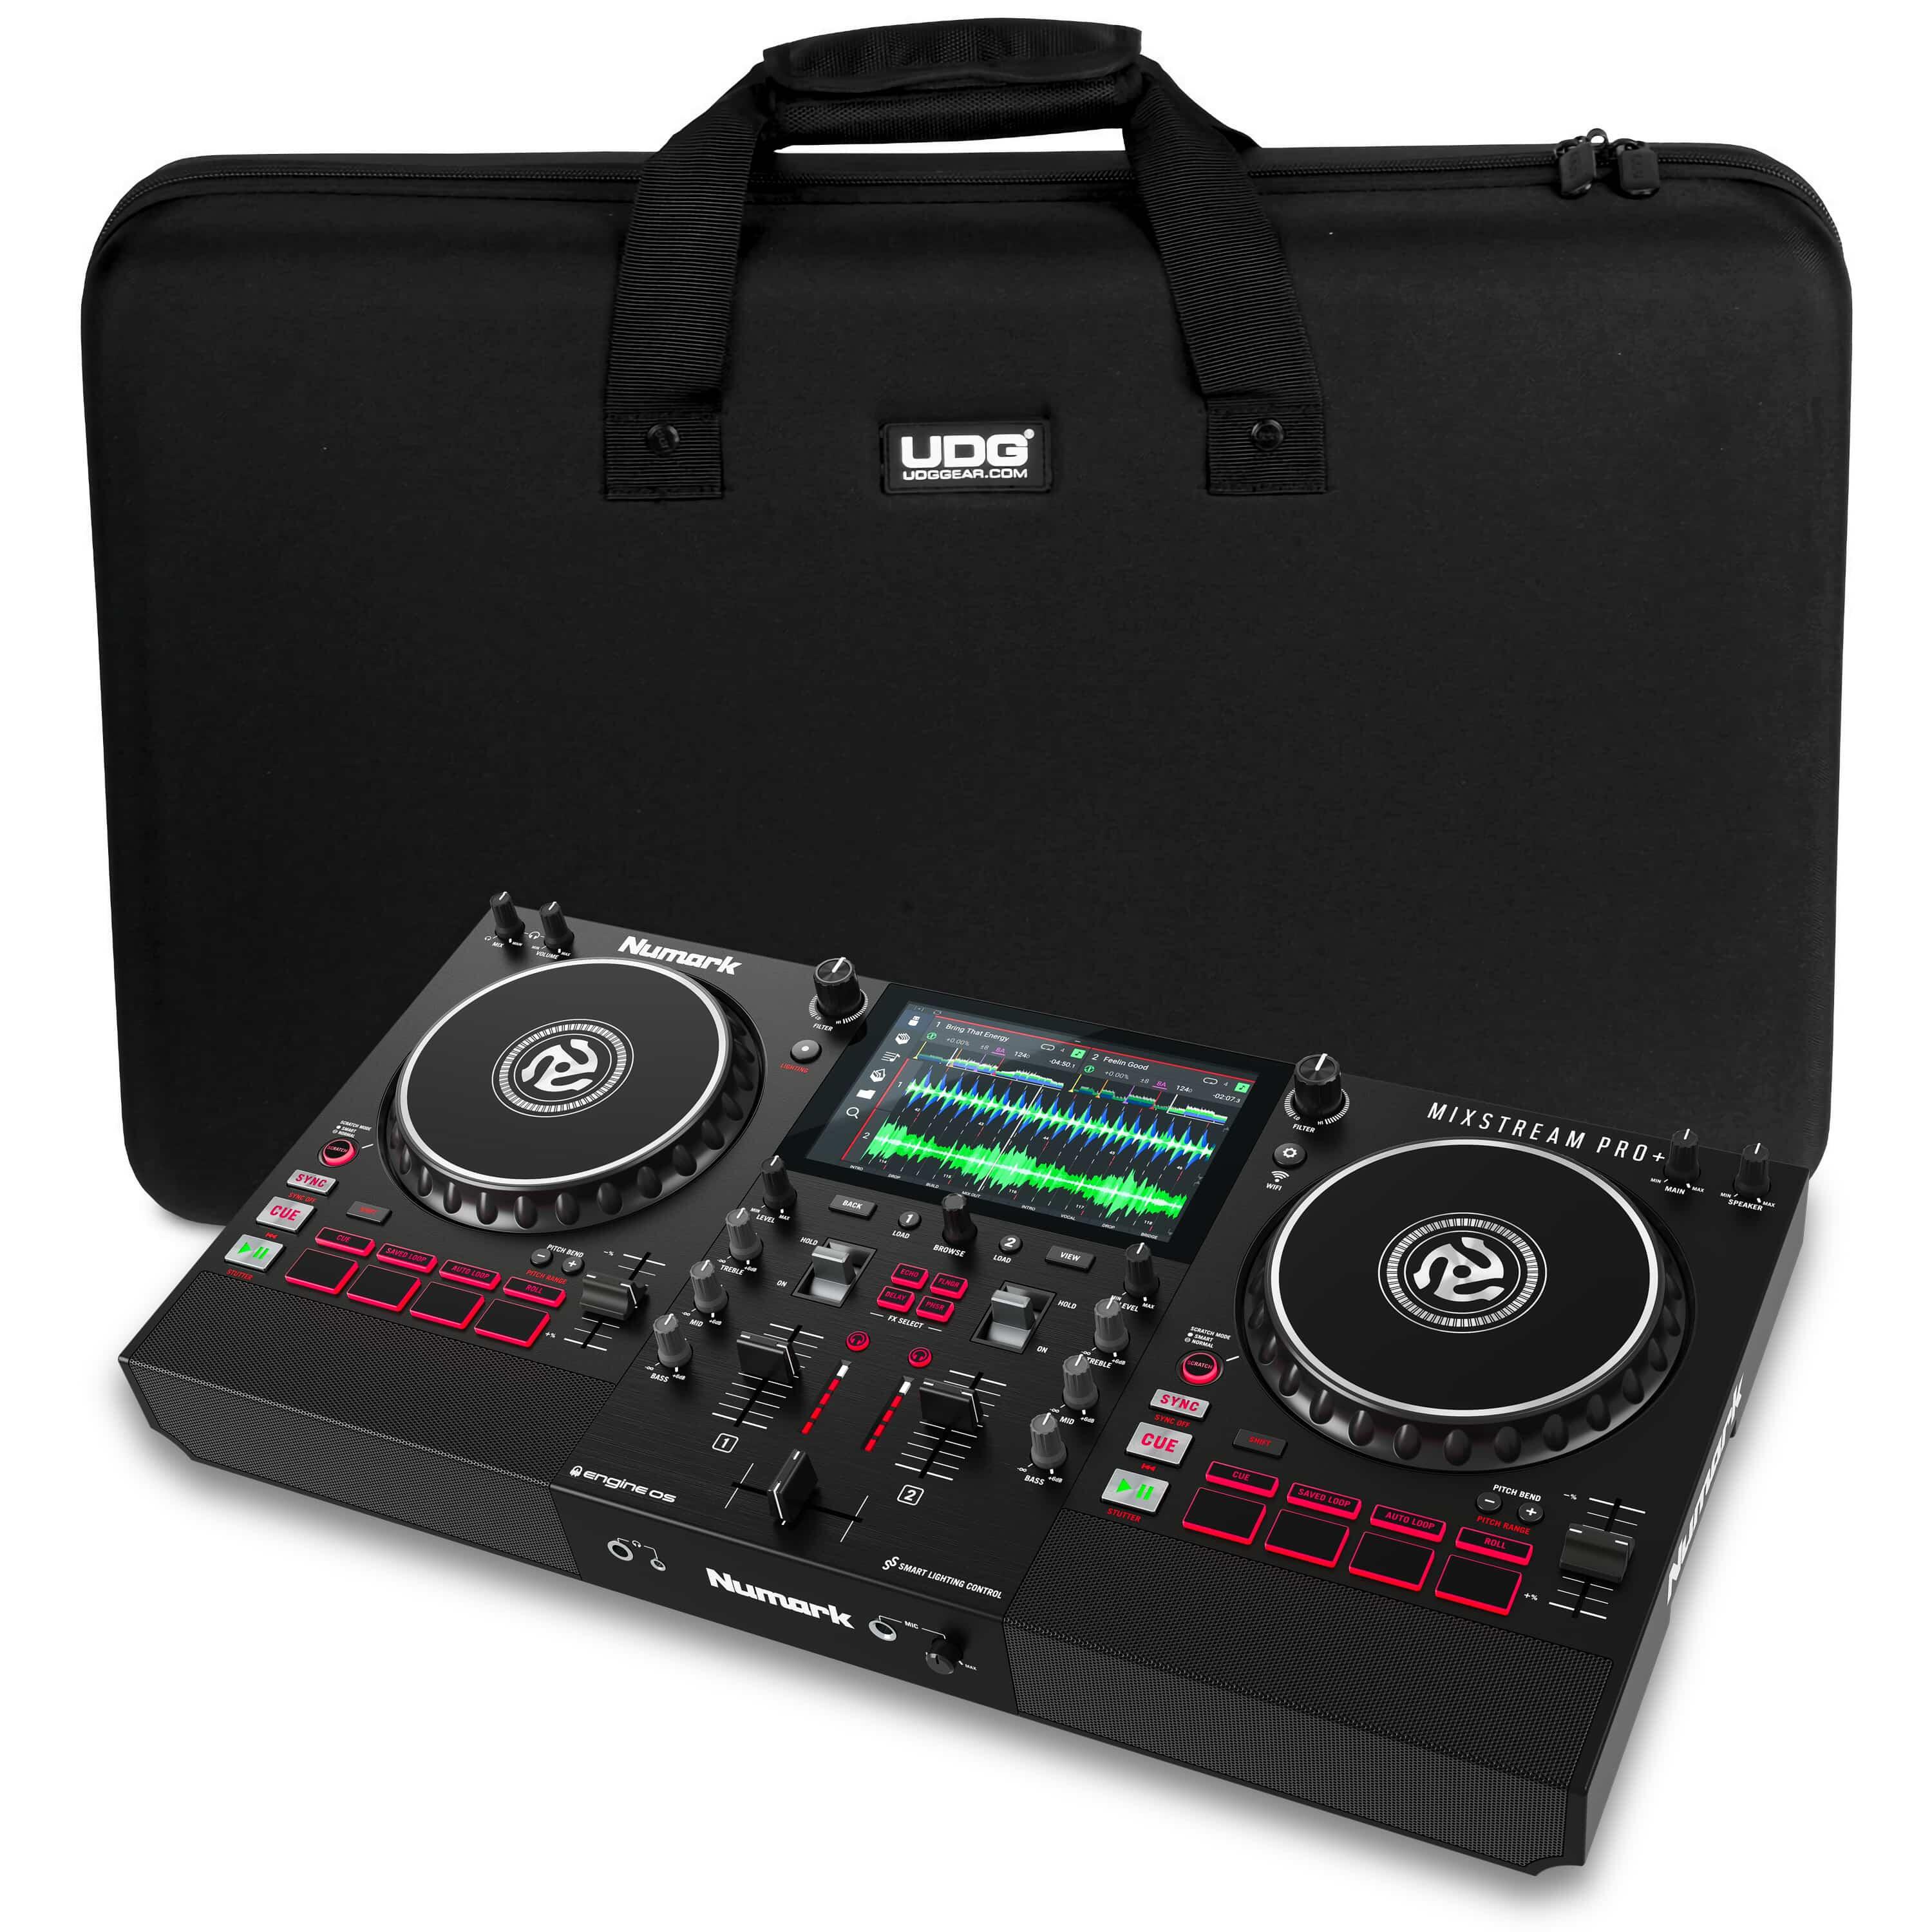 Mixstream Pro + & UDG Bag Package